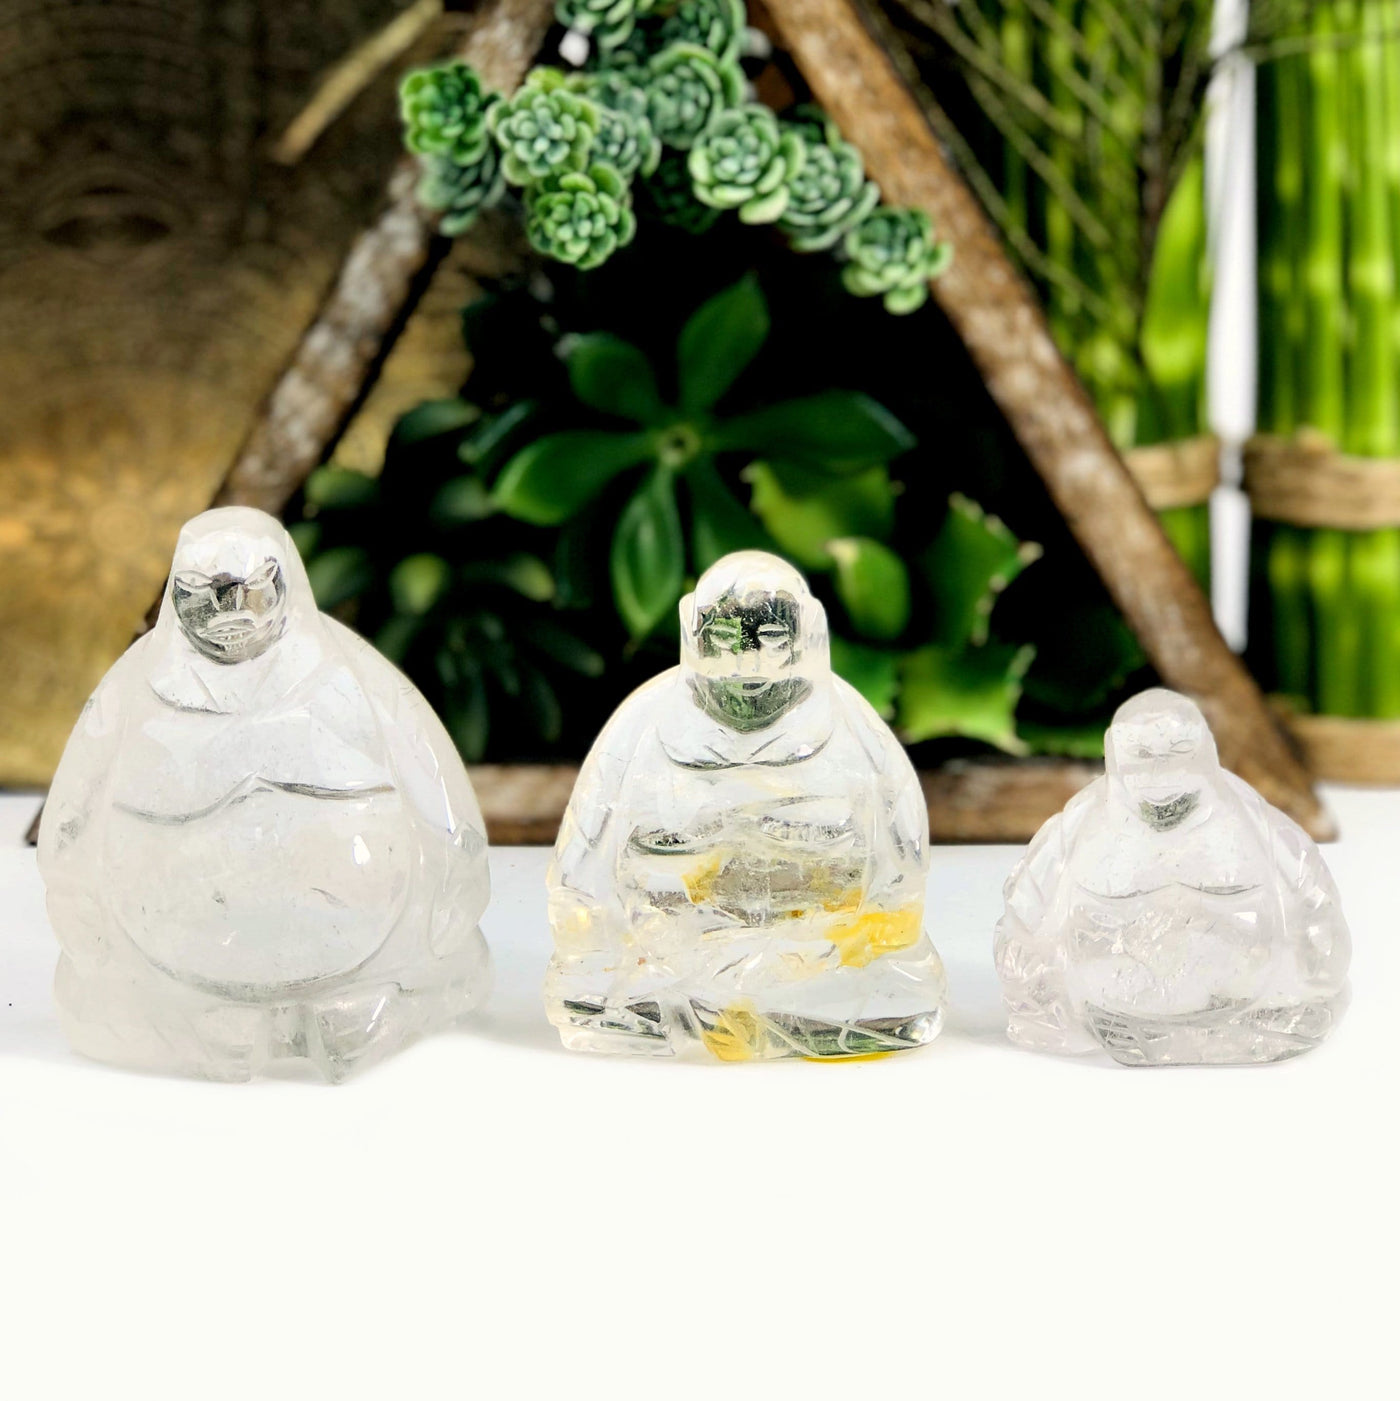 Crystal Quartz Sitting Buddha Mini Statues lined up from biggest to smallest size